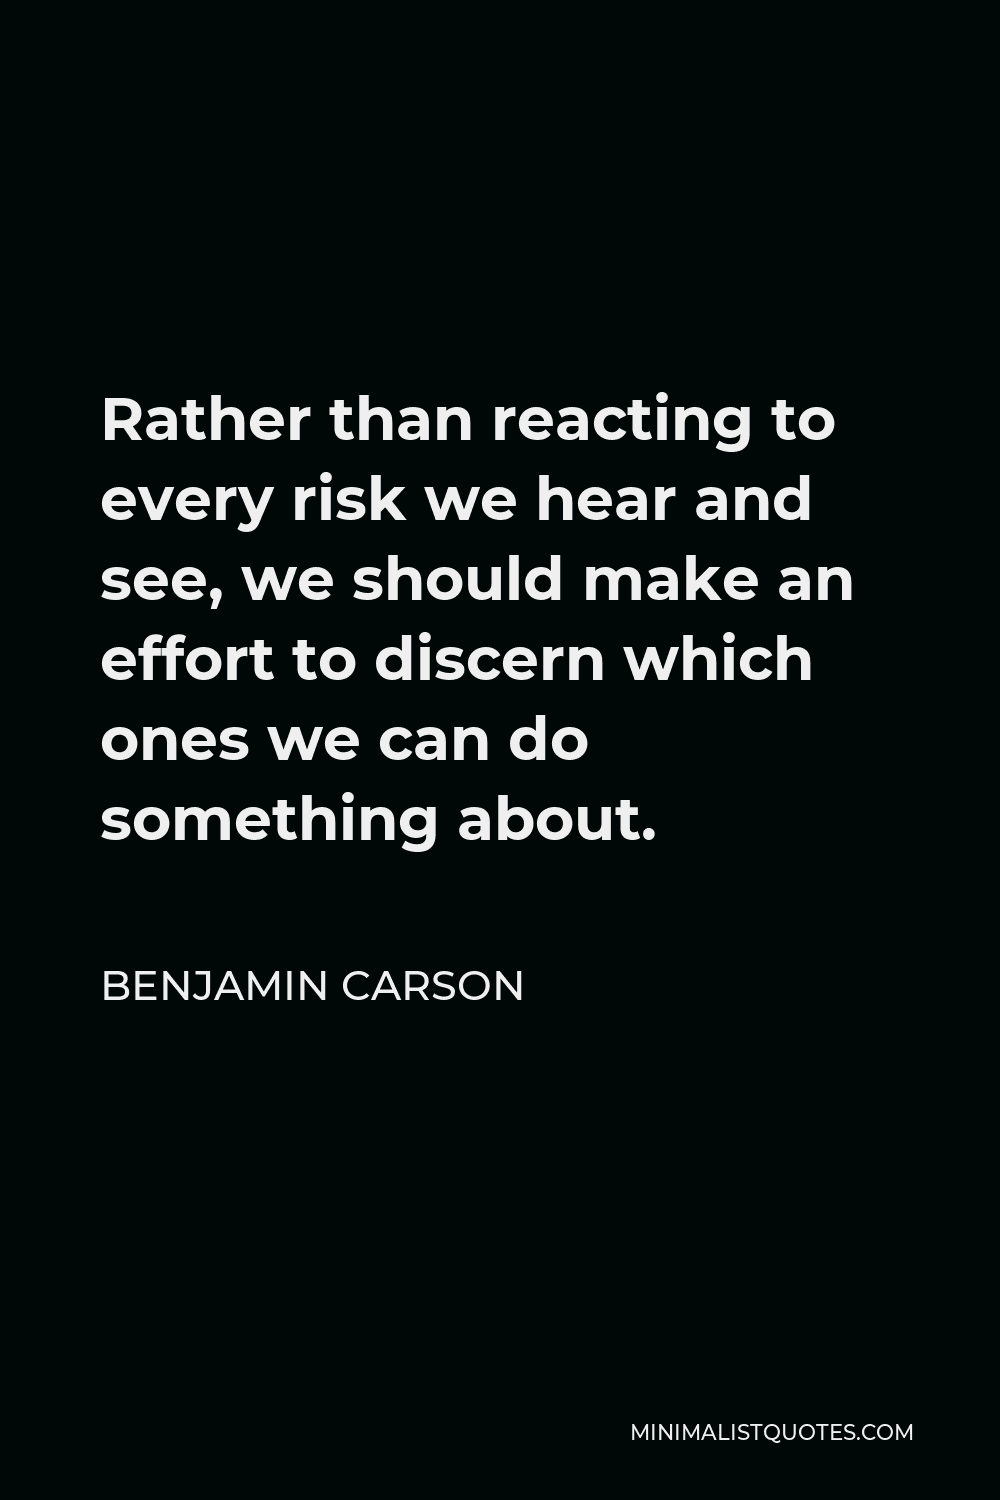 Benjamin Carson Quote - Rather than reacting to every risk we hear and see, we should make an effort to discern which ones we can do something about.